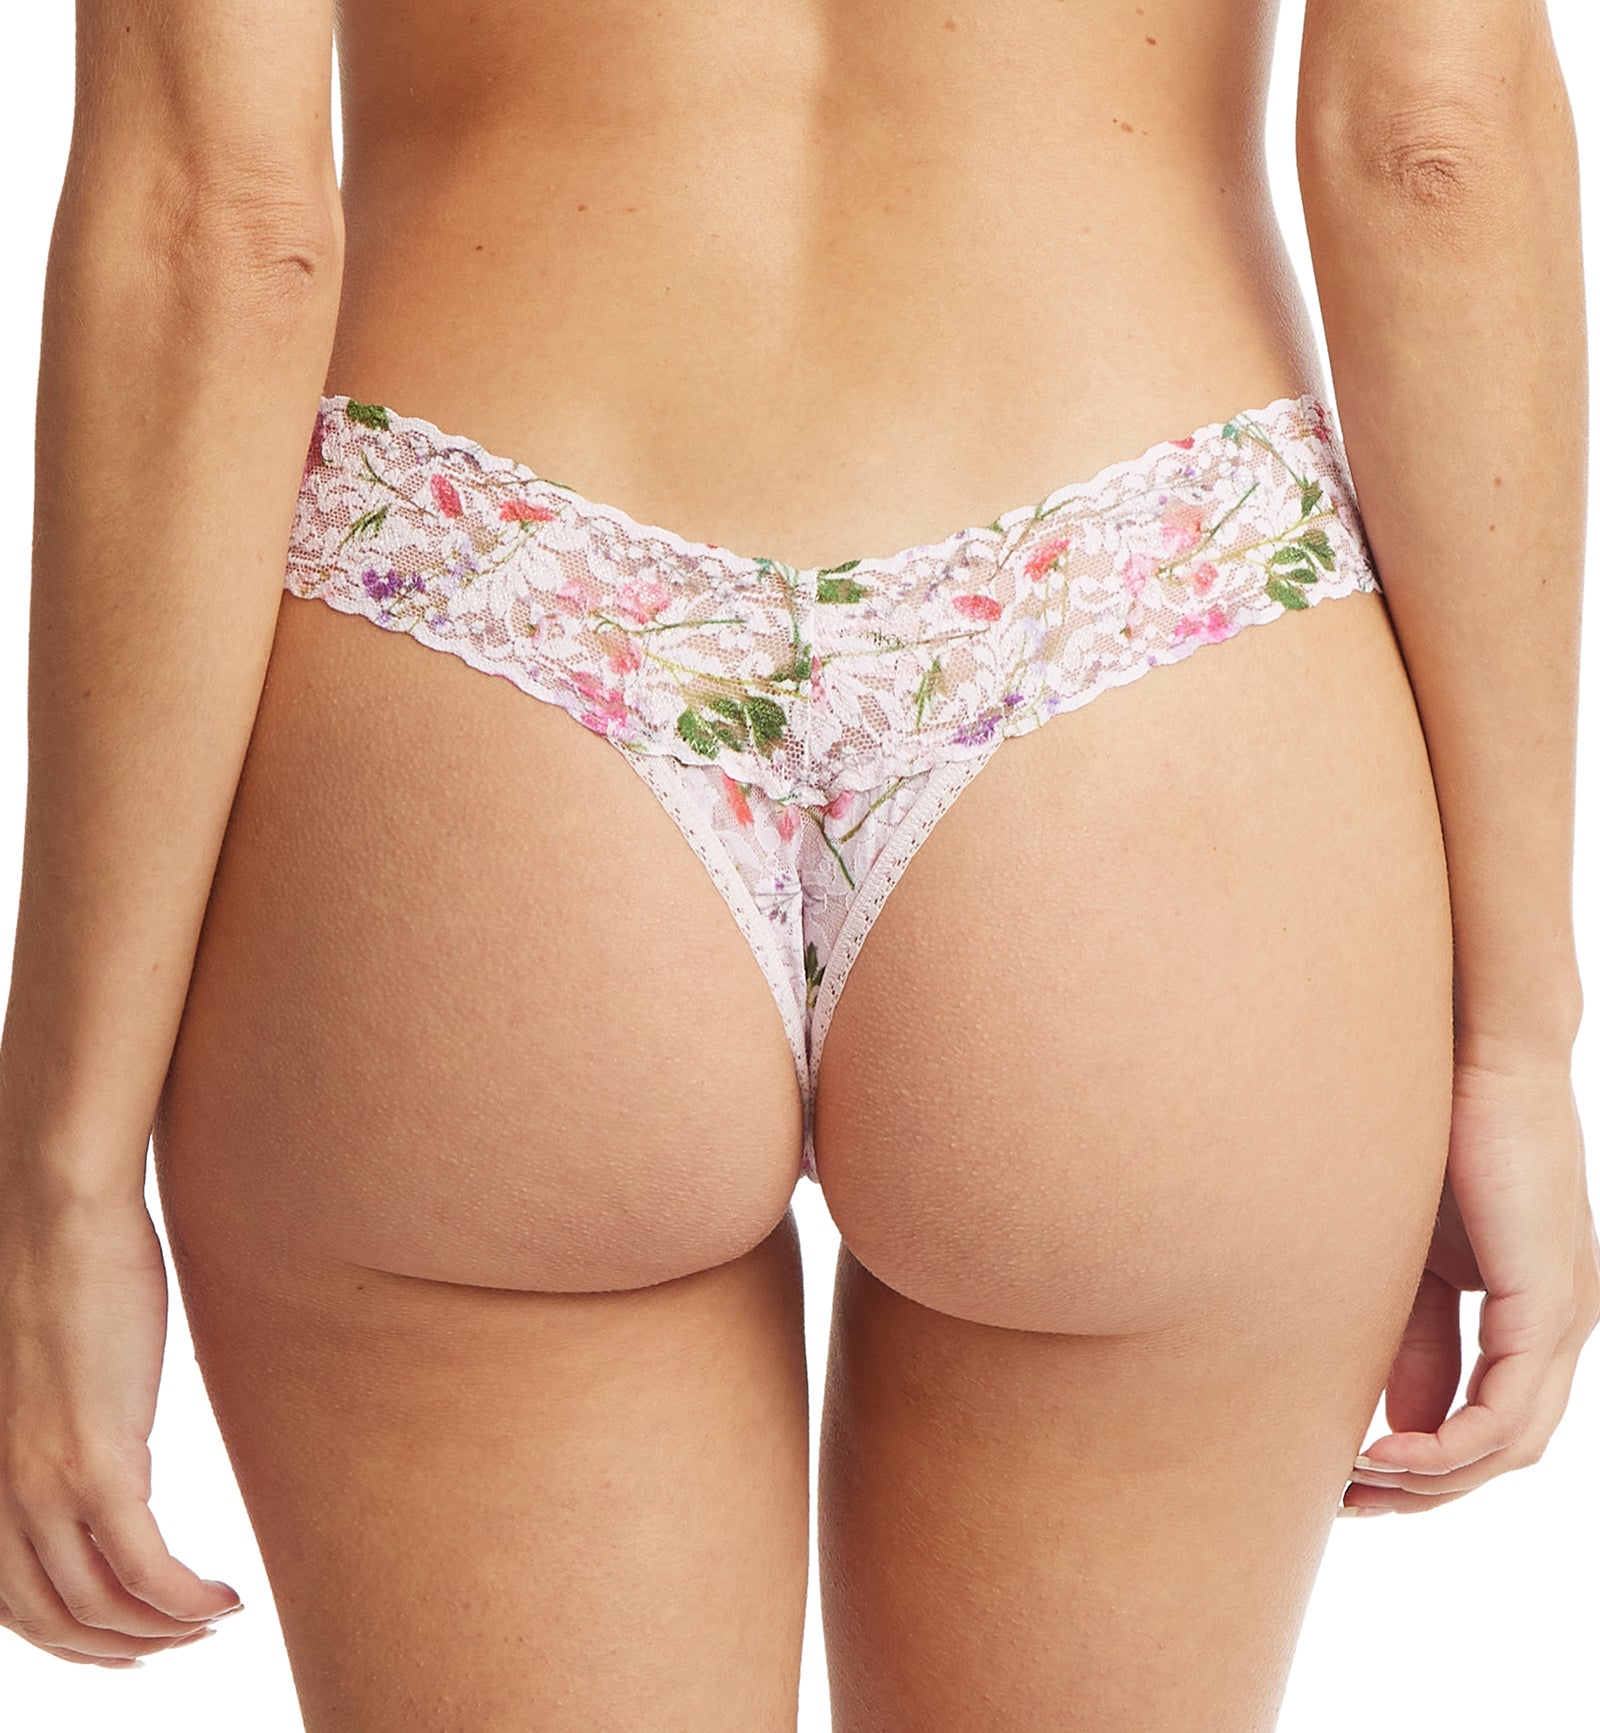 Hanky Panky Signature Lace Printed Low Rise Thong (PR4911P),Rise and Vines - Rise and Vines,One Size